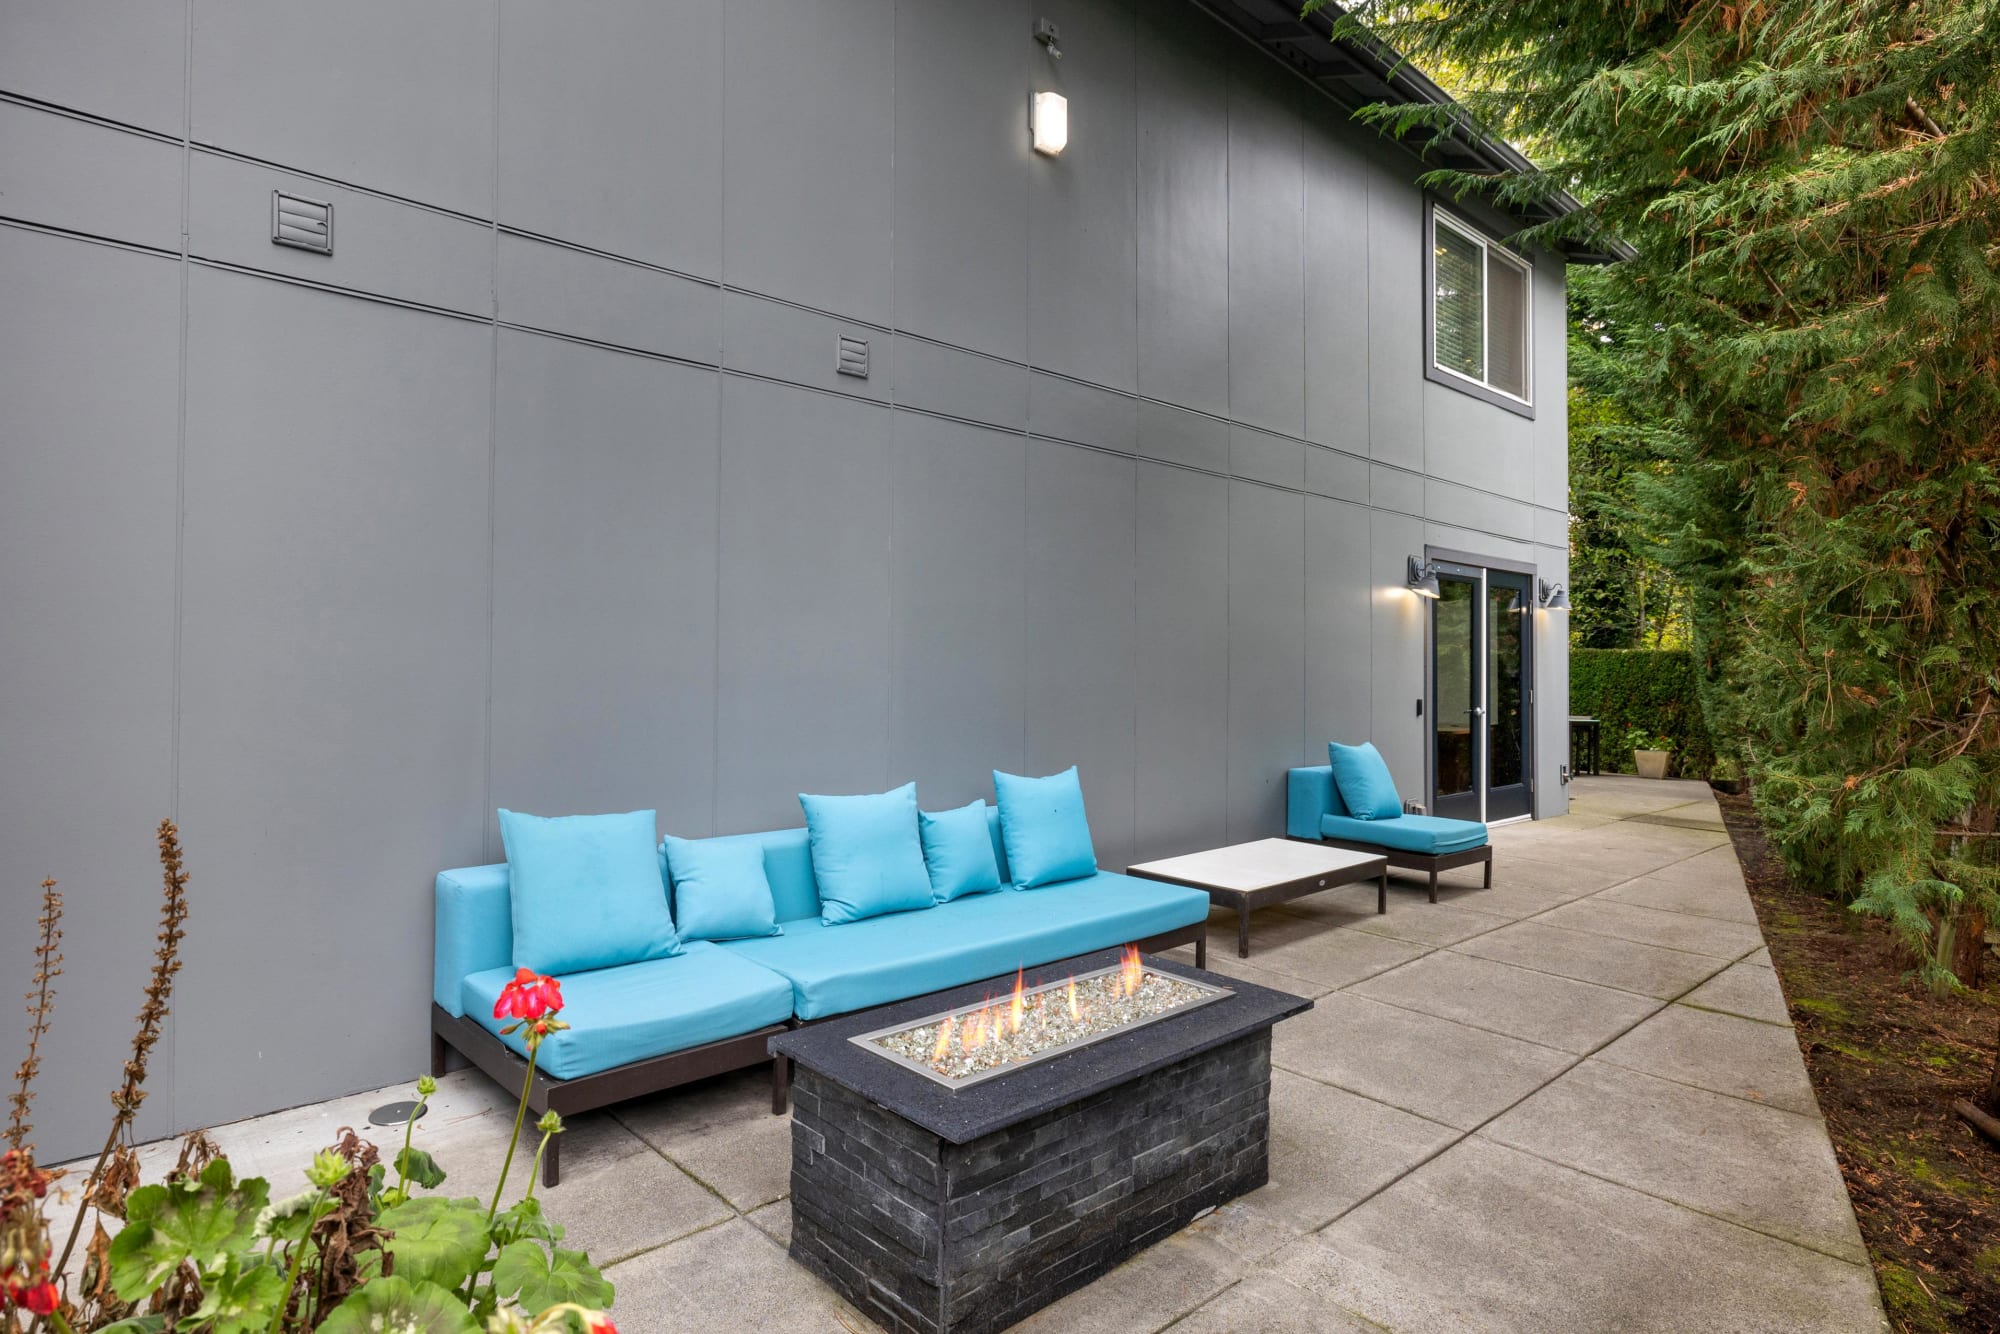 The fire pit lounge area at Karbon Apartments in Newcastle, Washington